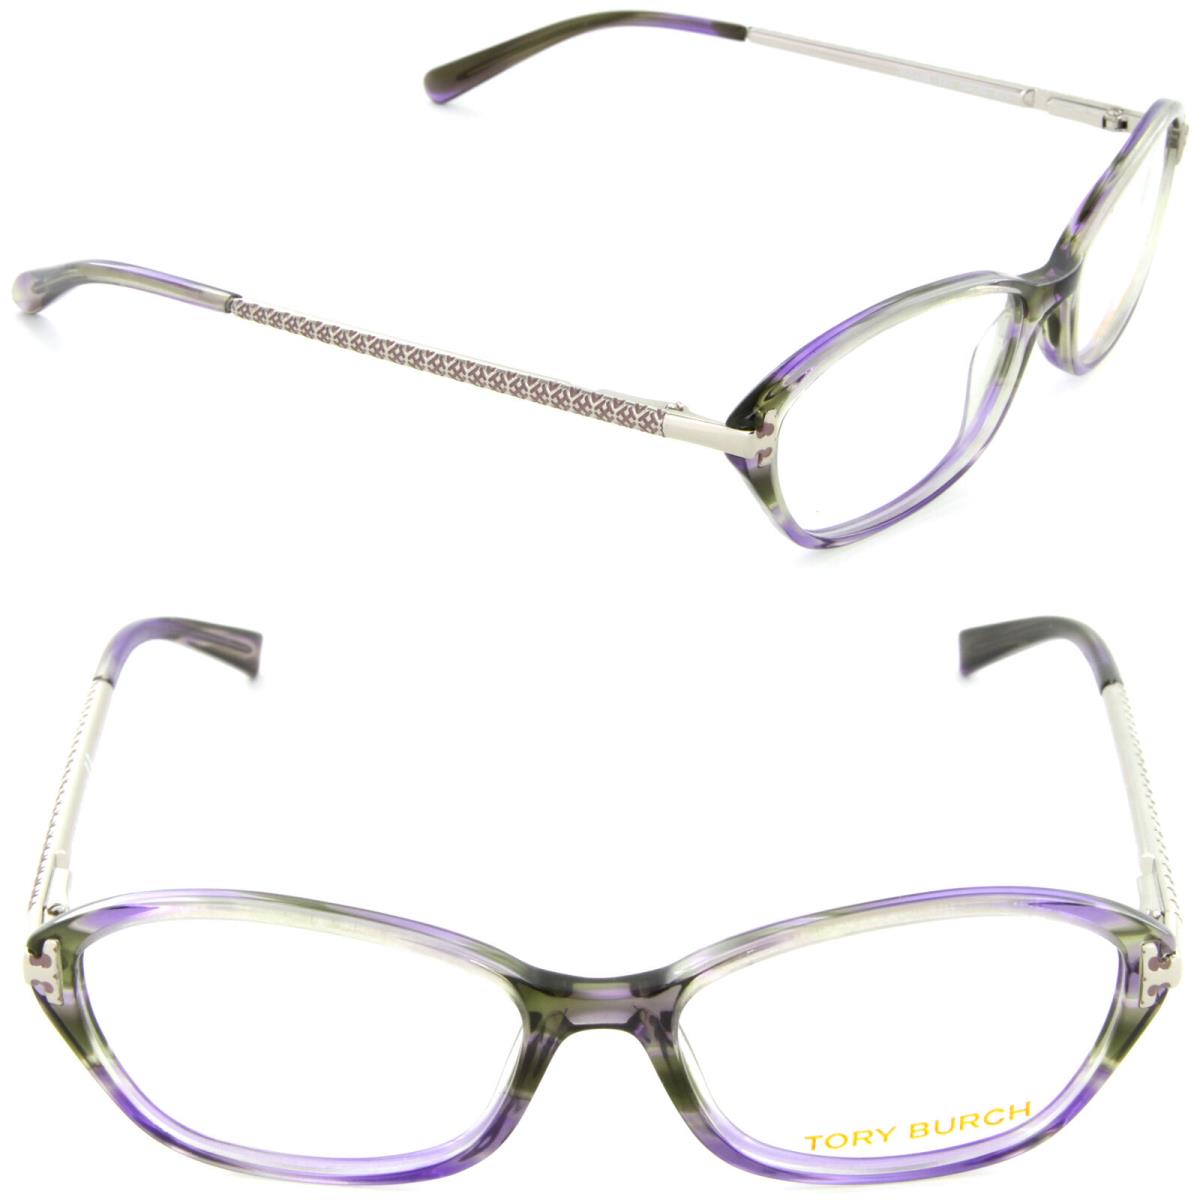 Tory Burch TY 2008 745 50mm Oval Eyeglasses Purple / Demo Lens Closeout